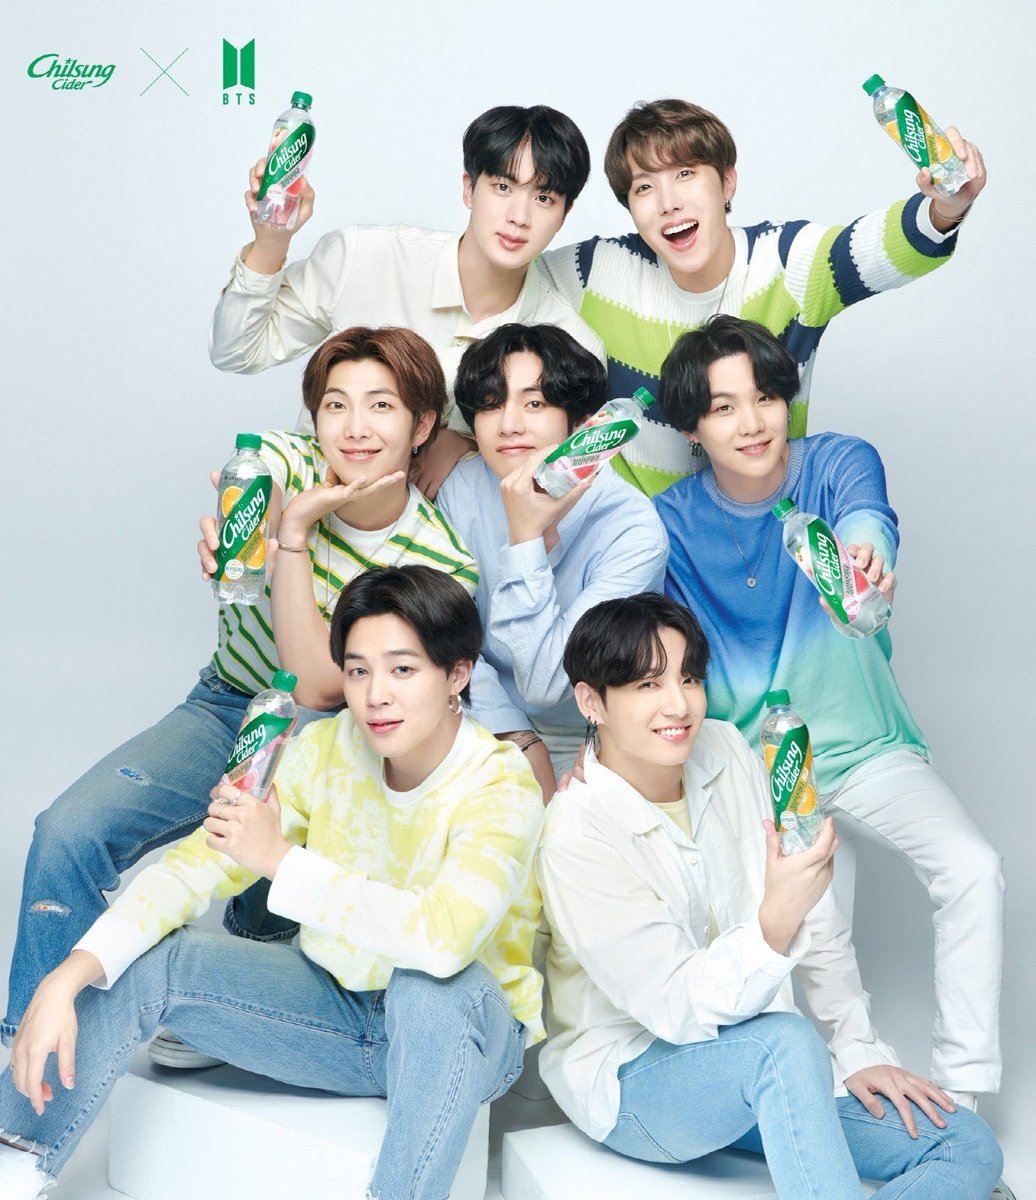 CHILSUNG CIDER Picked BTS as its New Model